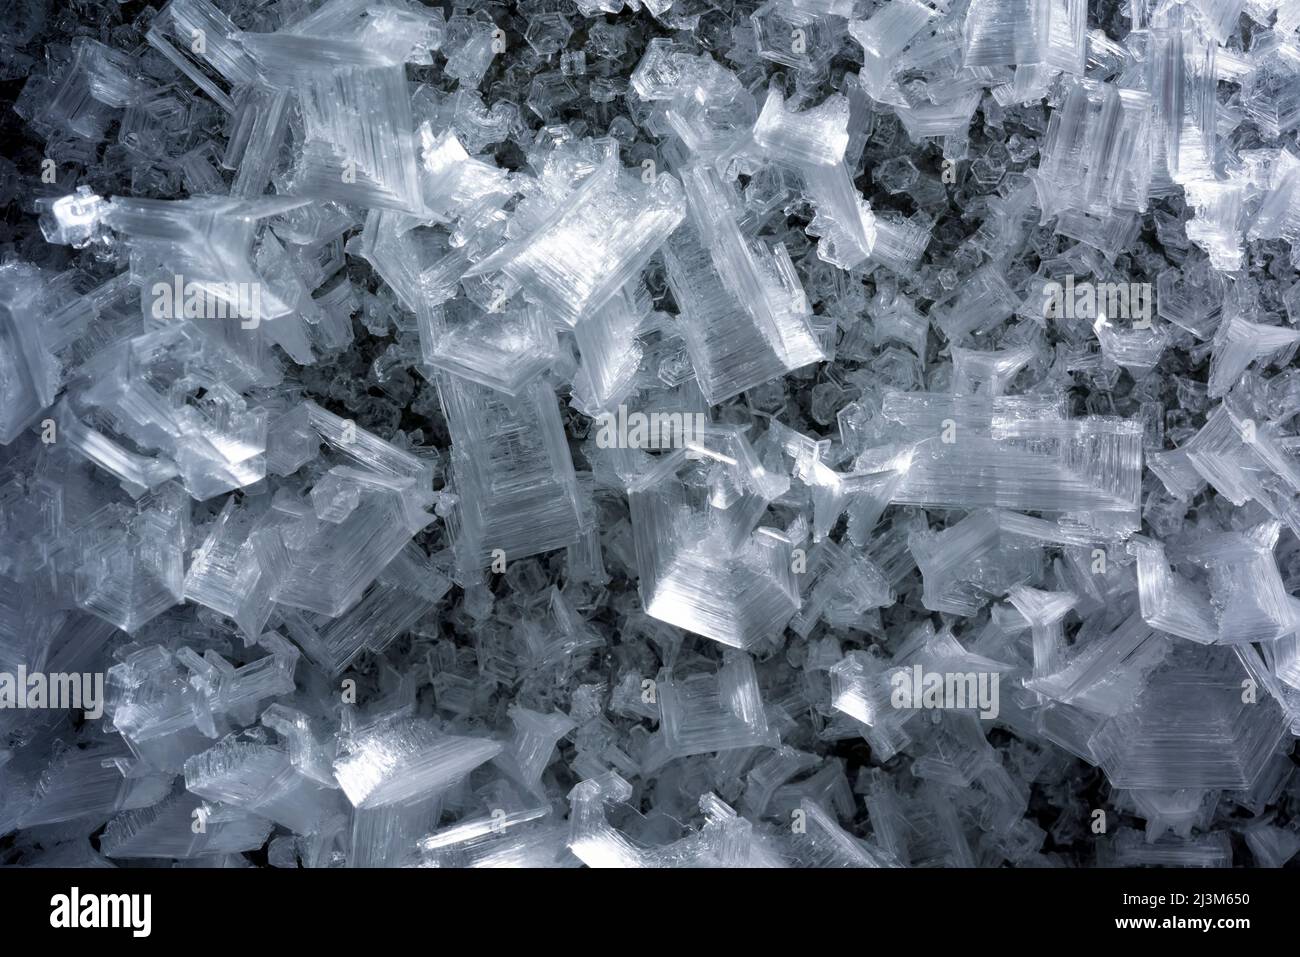 Detail of the giant ice crystals clinging to the walls and ceiling of The Crystal Palace cave.; Greenland. Stock Photo